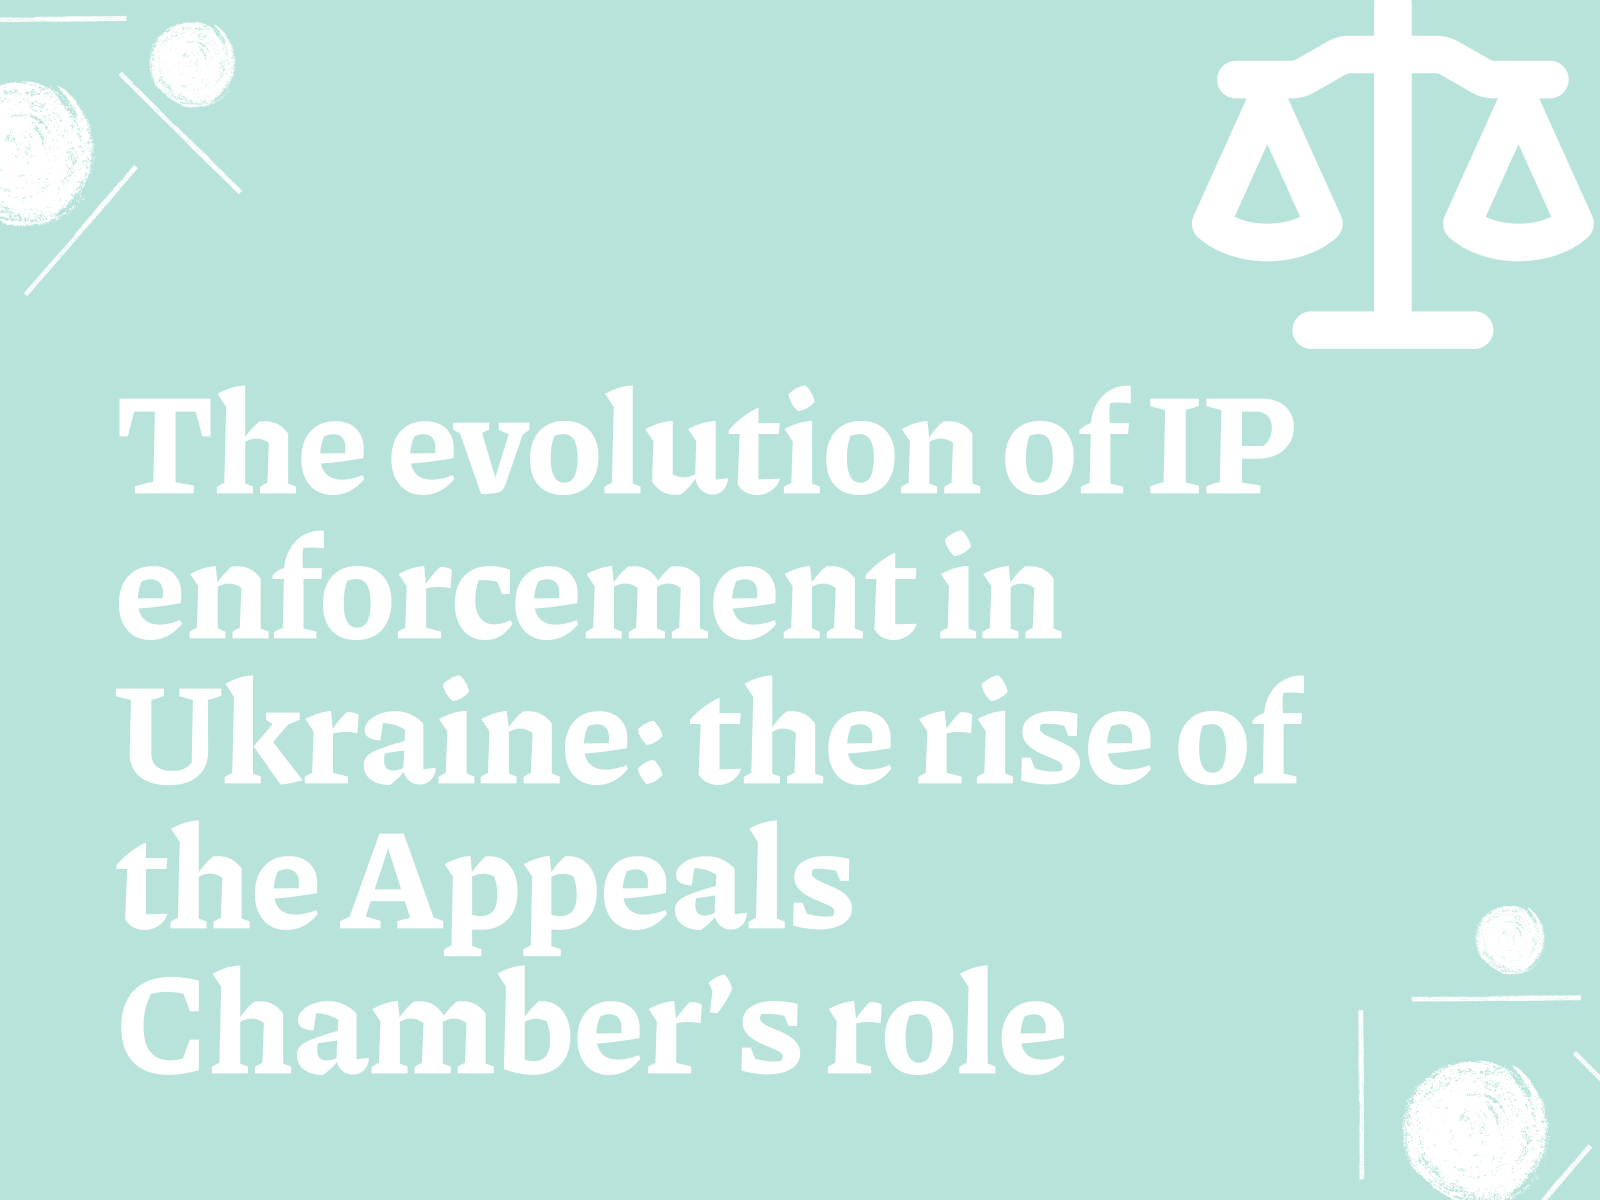 The evolution of IP enforcement in Ukraine: the rise of the Appeals Chamber’s role